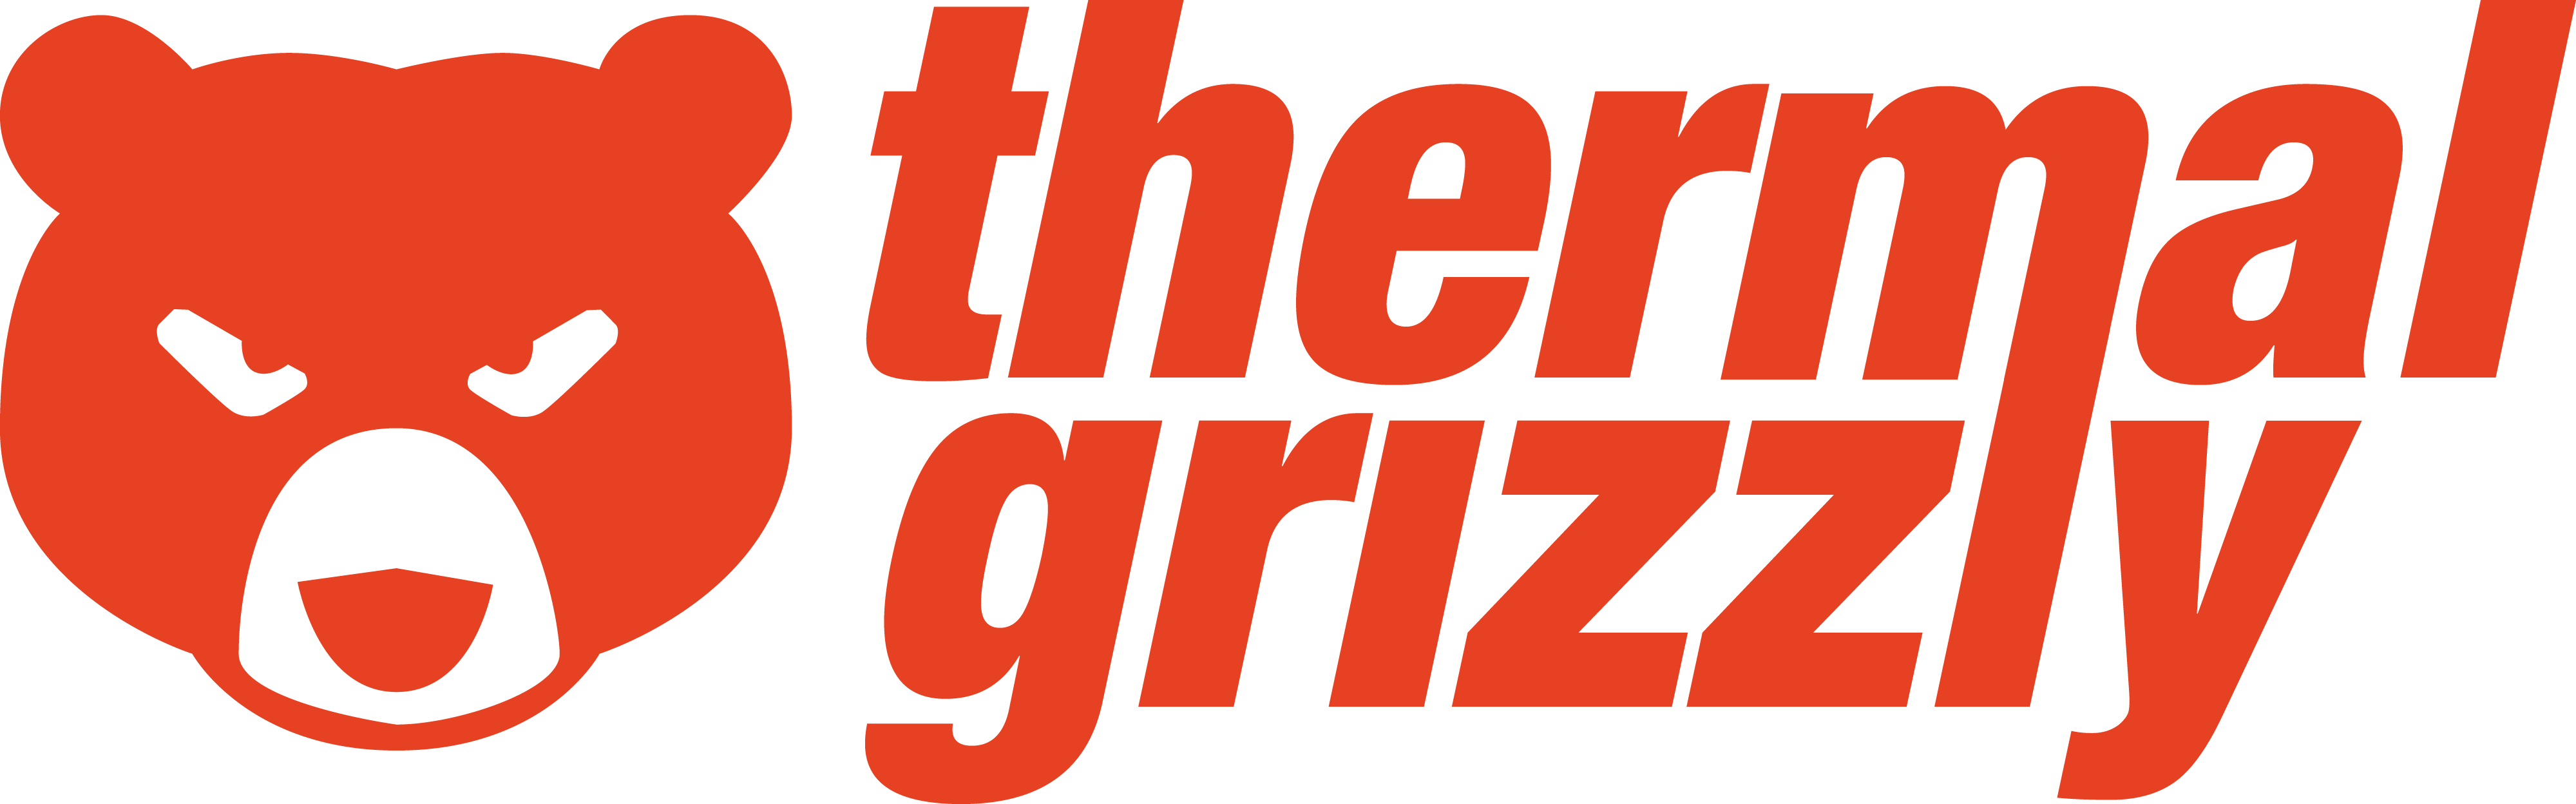 Thermal Grizzly Logo